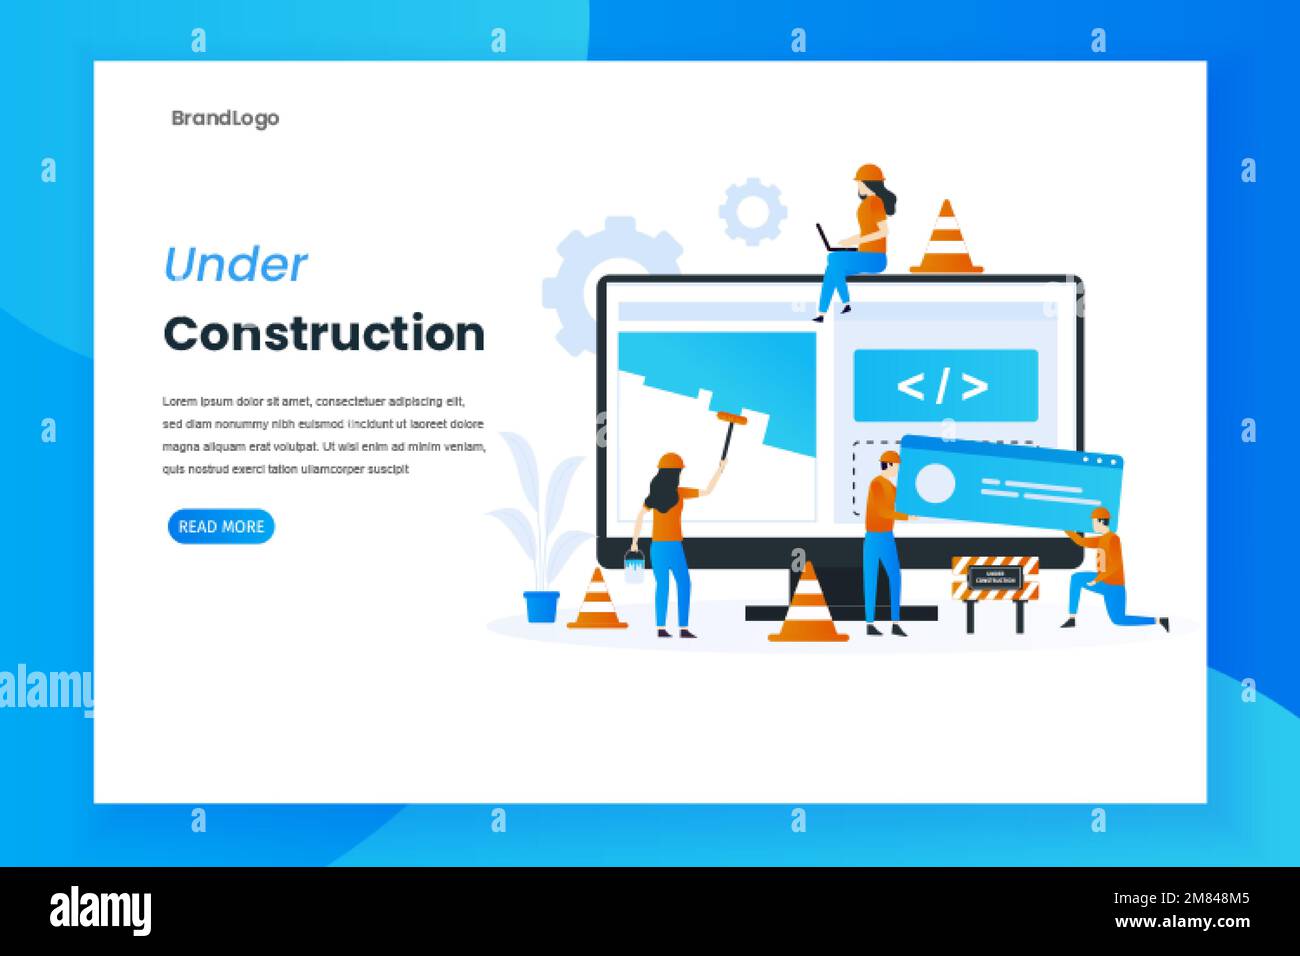 Under construction landing page illustration template. Illustration for websites, landing pages, mobile applications, posters and banners Stock Vector